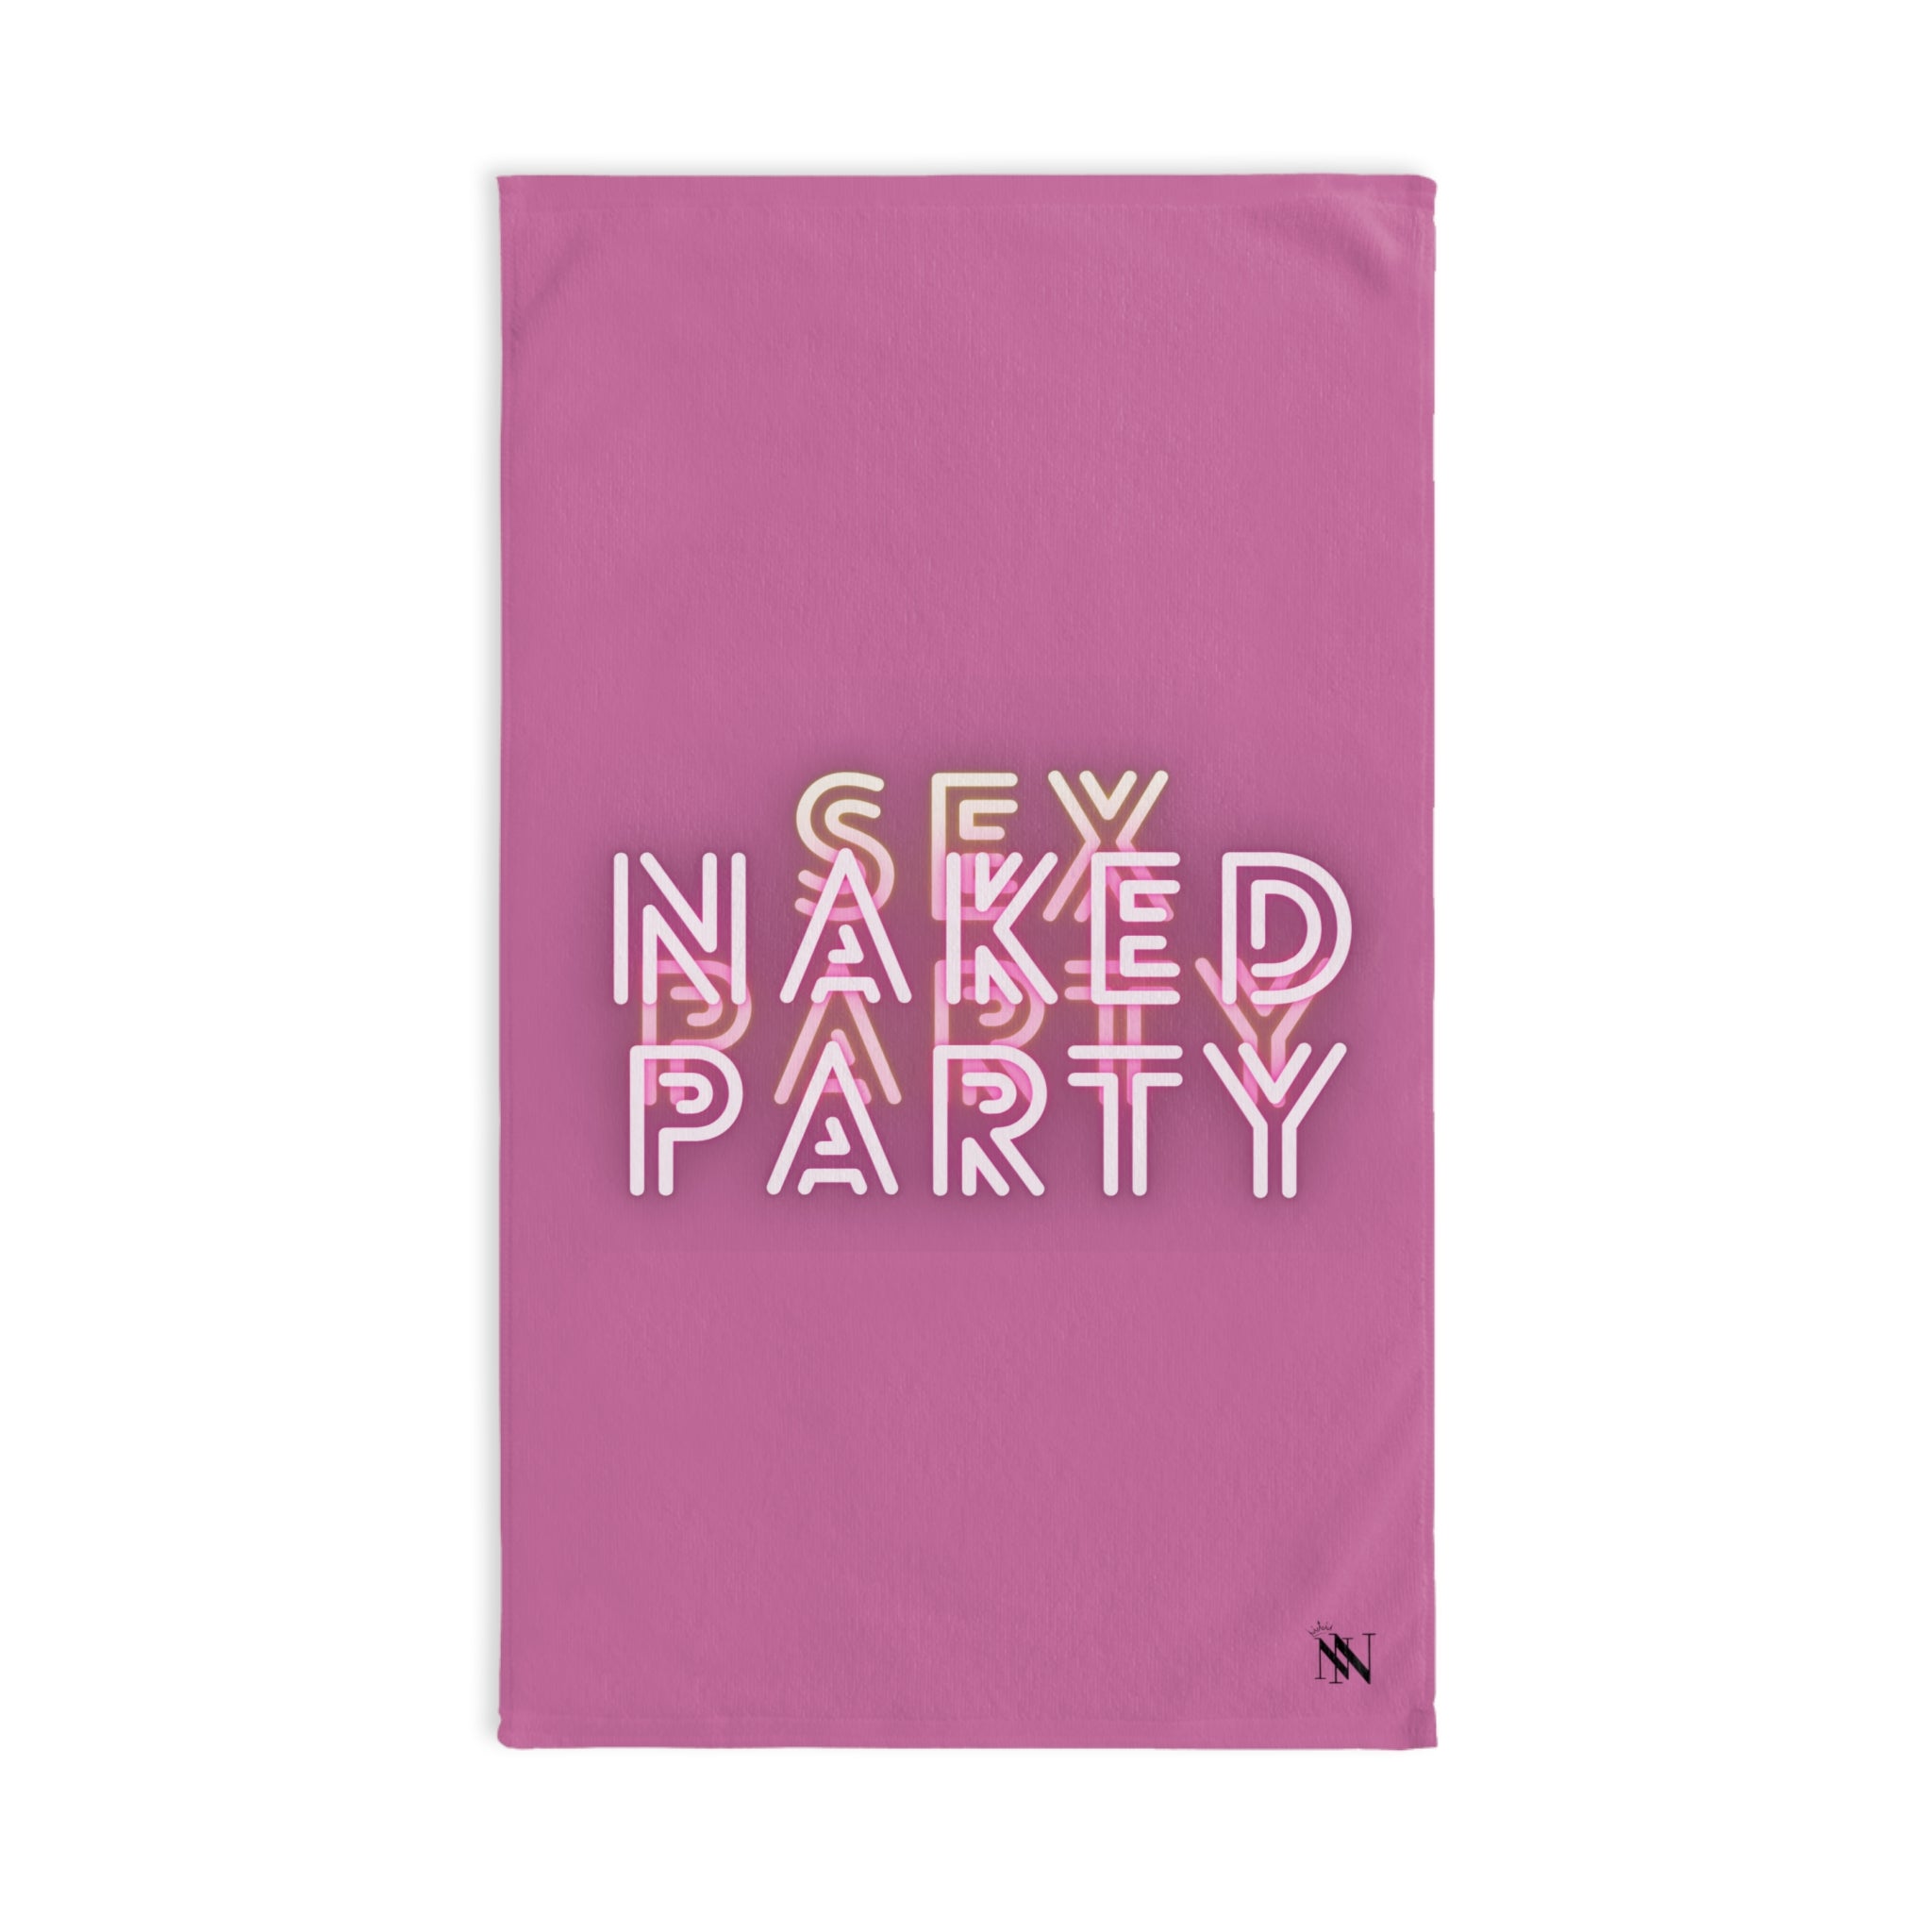 Naked  PartyPink | Novelty Gifts for Boyfriend, Funny Towel Romantic Gift for Wedding Couple Fiance First Year Anniversary Valentines, Party Gag Gifts, Joke Humor Cloth for Husband Men BF NECTAR NAPKINS